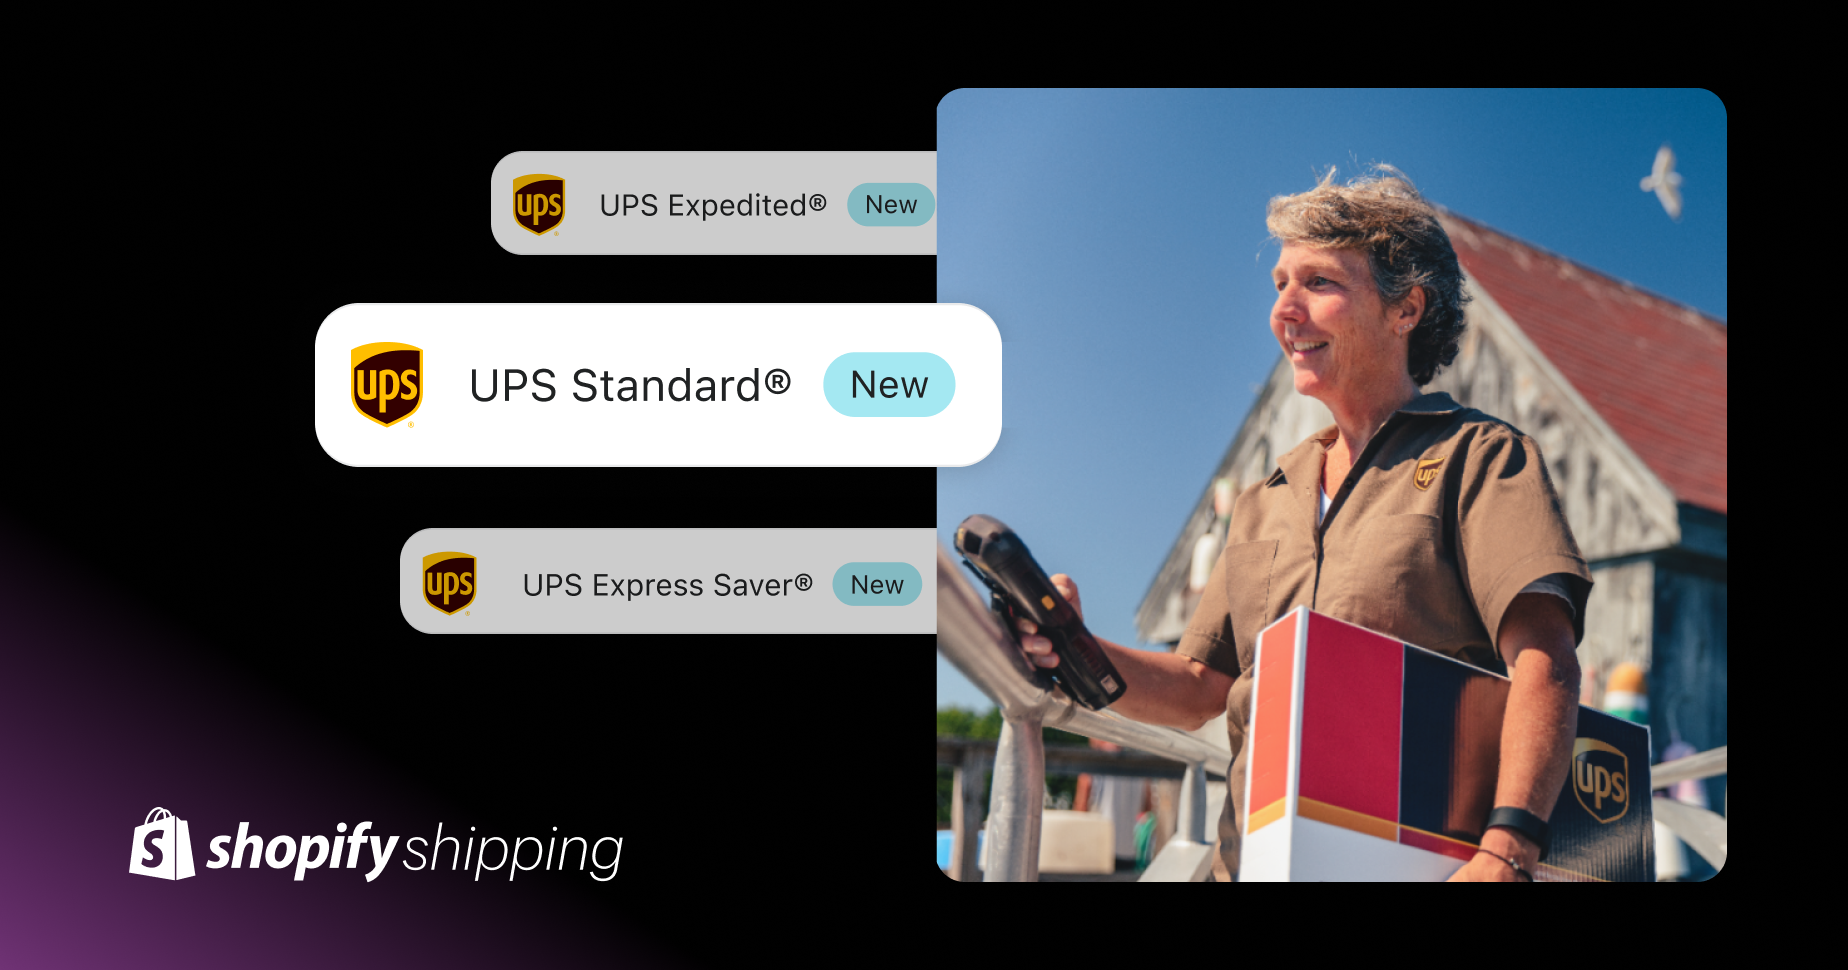 A UPS driver holding a sealed package with the UPS logo outside a home in a sunny environment. Labels of UPS Standard, UPS Expedited, UPS Express Saver and "New" label appear next to the driver, along with the Shopify Shipping logo.